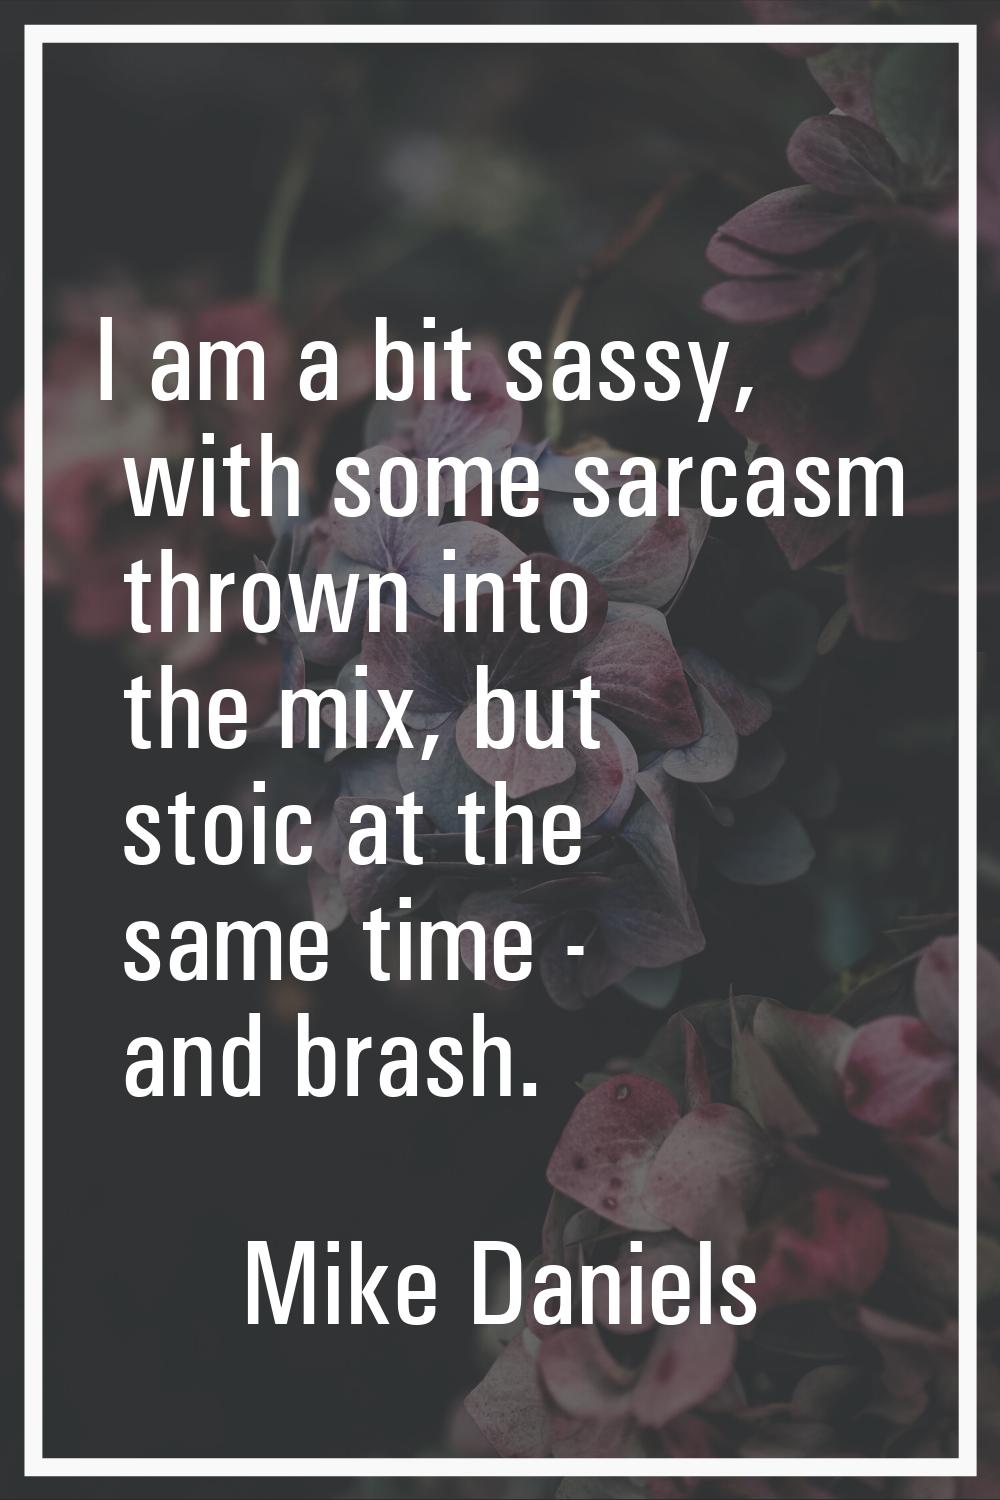 I am a bit sassy, with some sarcasm thrown into the mix, but stoic at the same time - and brash.